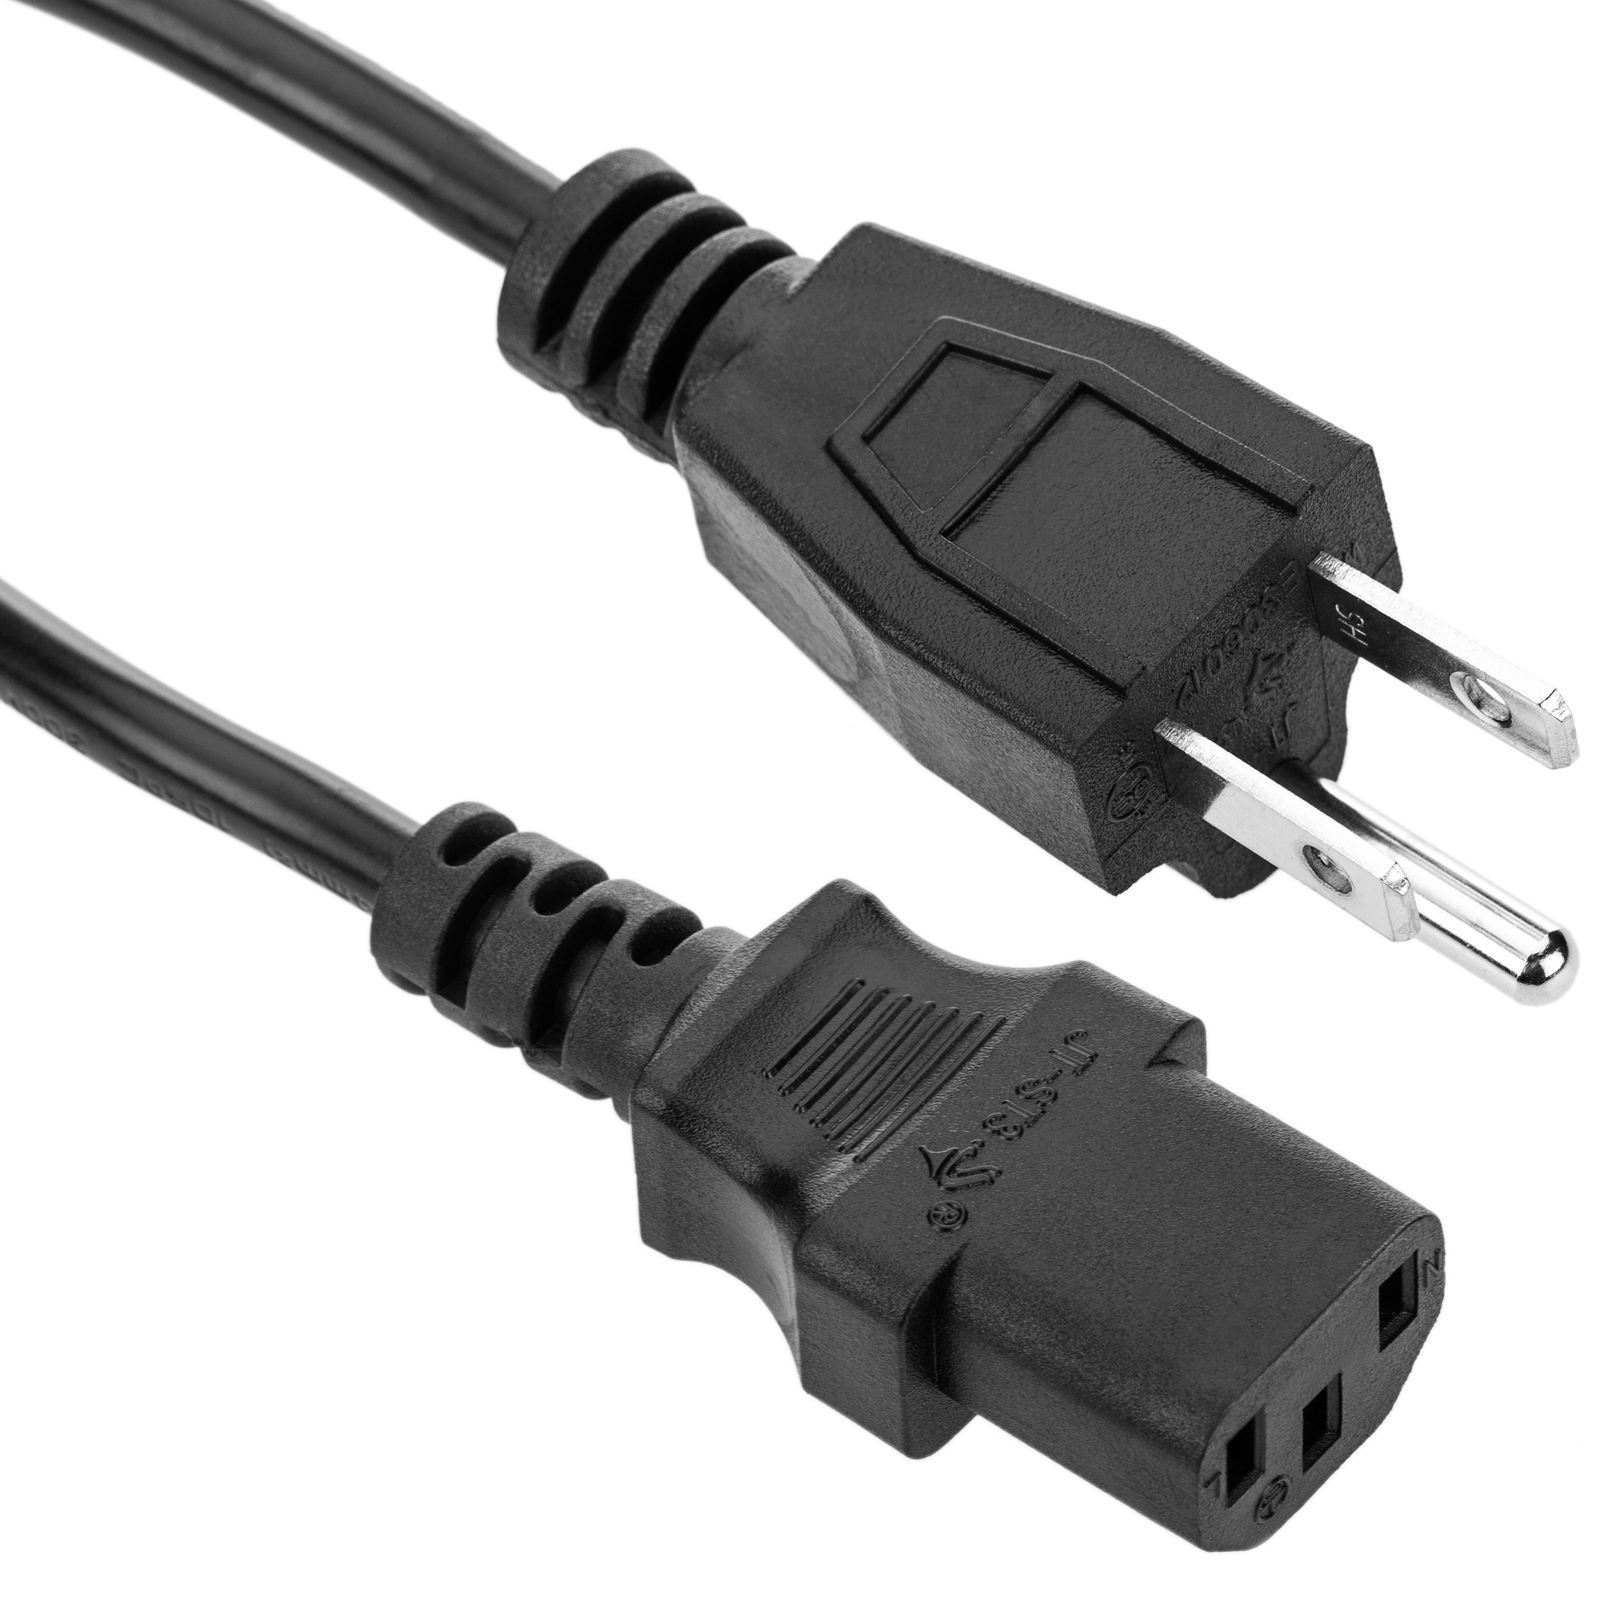 Amamax AC Power Cord Cable 3 Feet for VIZIO TV - 3 Prong NEMA 5-15P to IEC  60320C13 (UL Listed) by iMBAPrice 